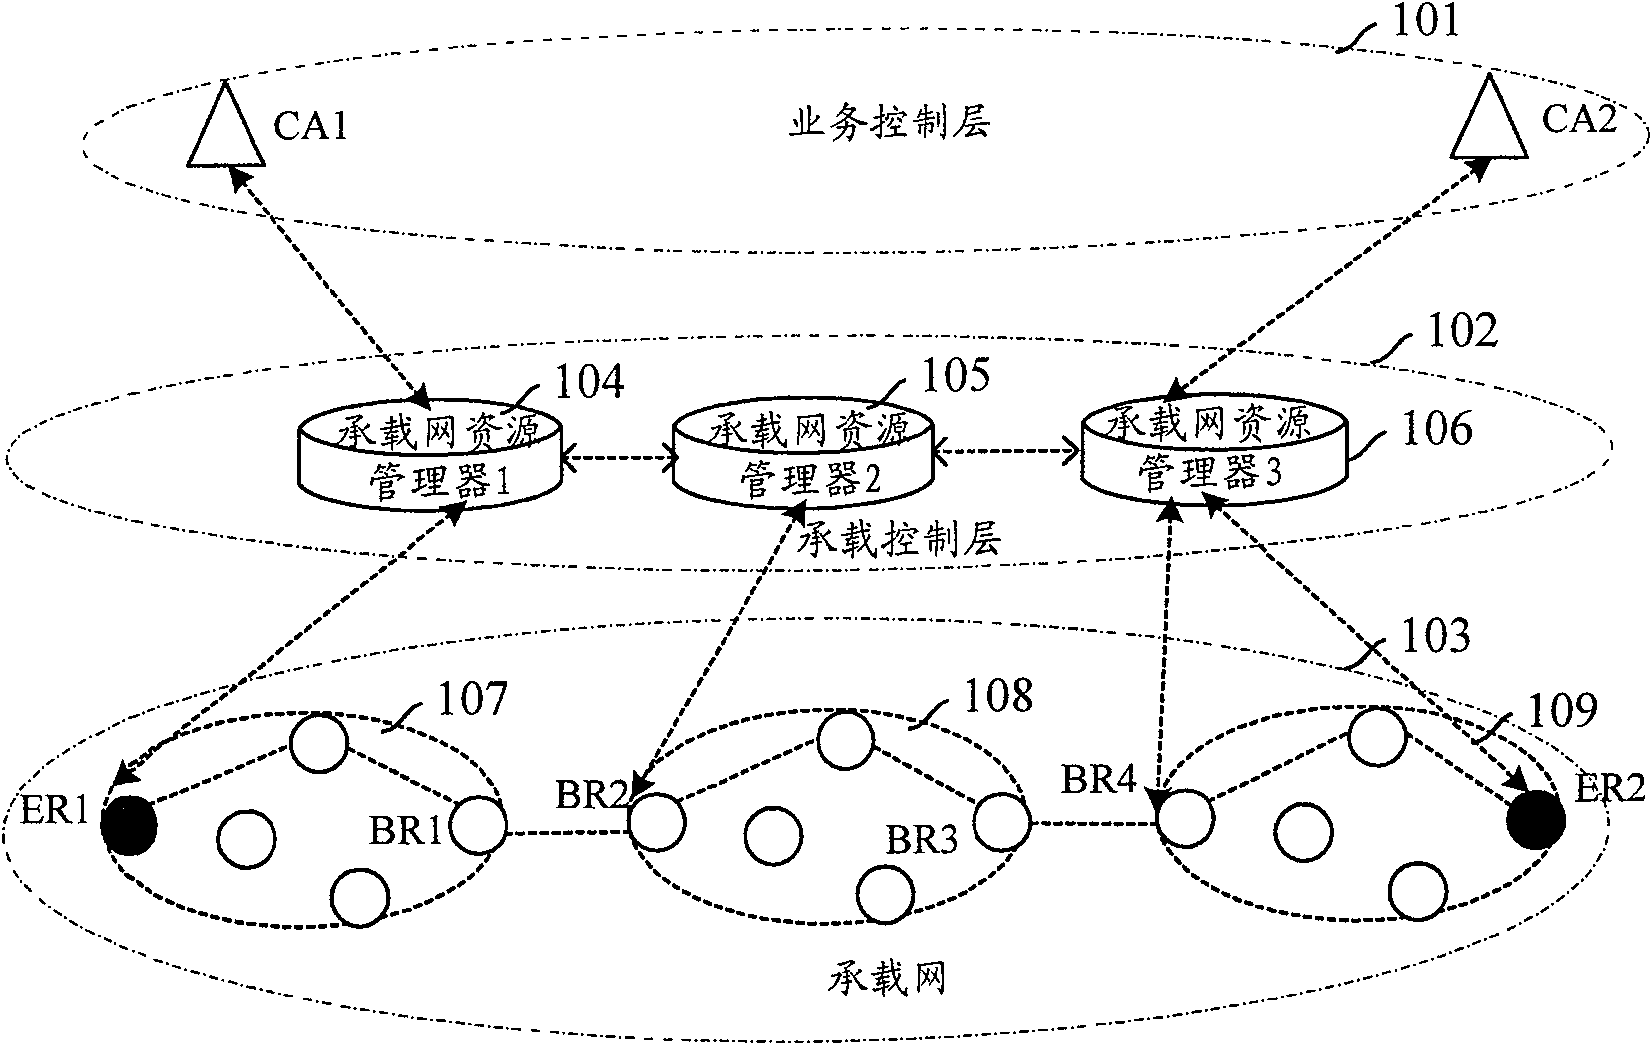 Method for configuring path route at carrying network resource supervisor